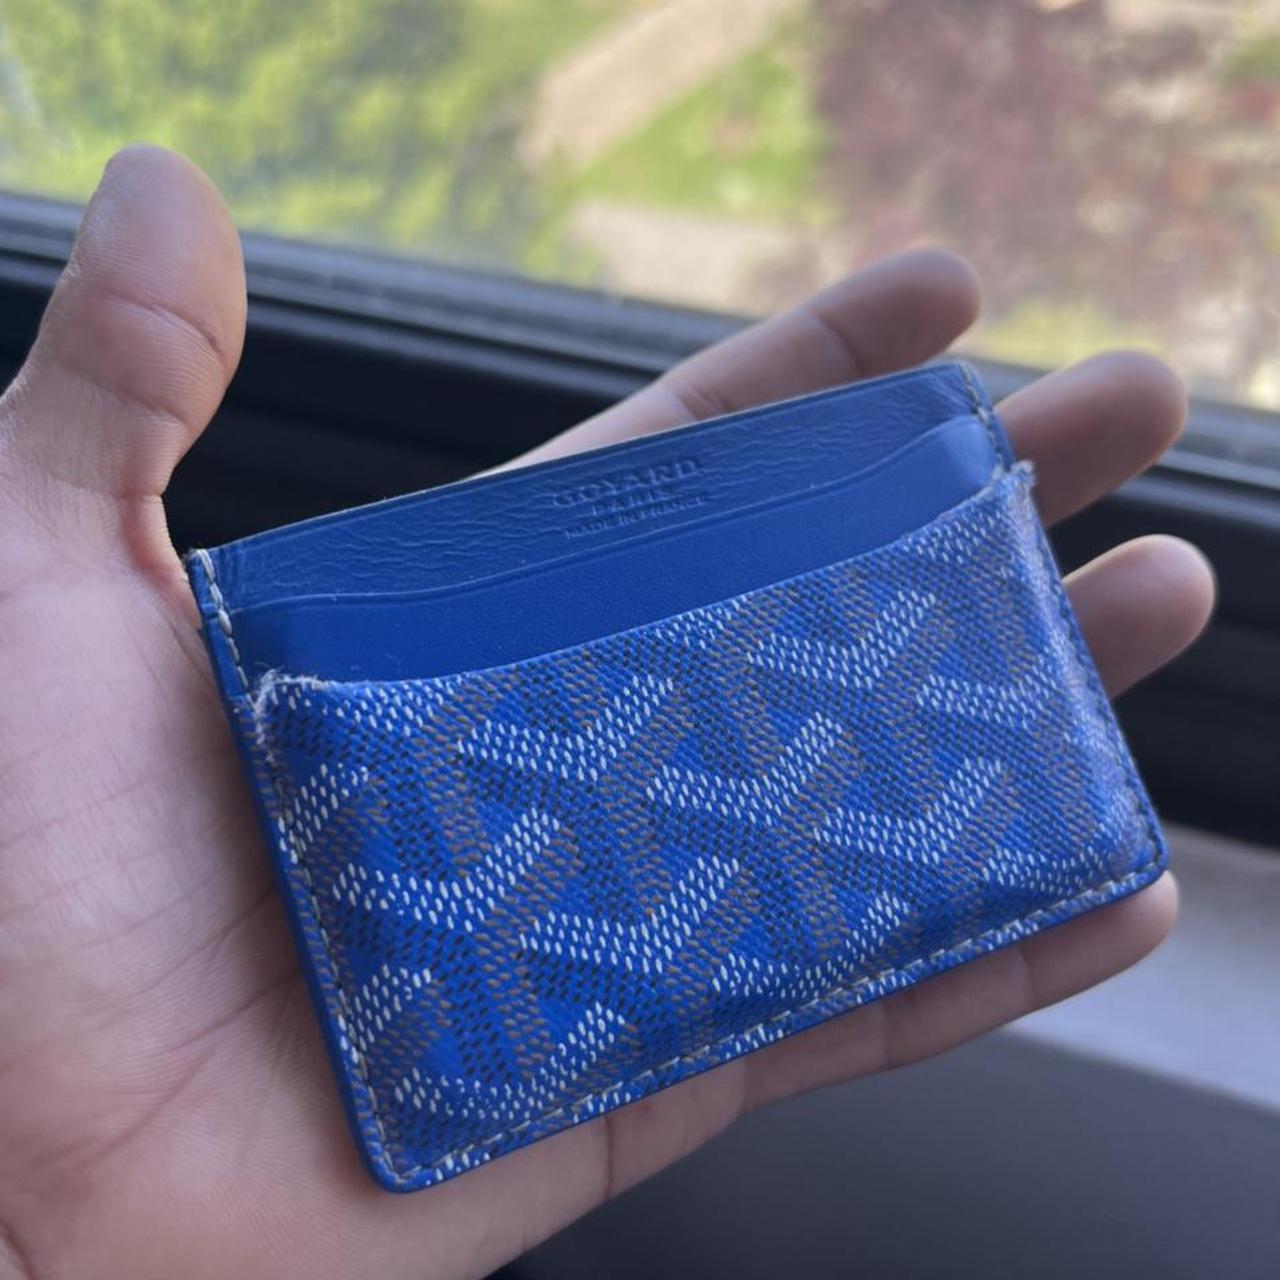 Goyard pouch (work as wallet too) Overall - Depop